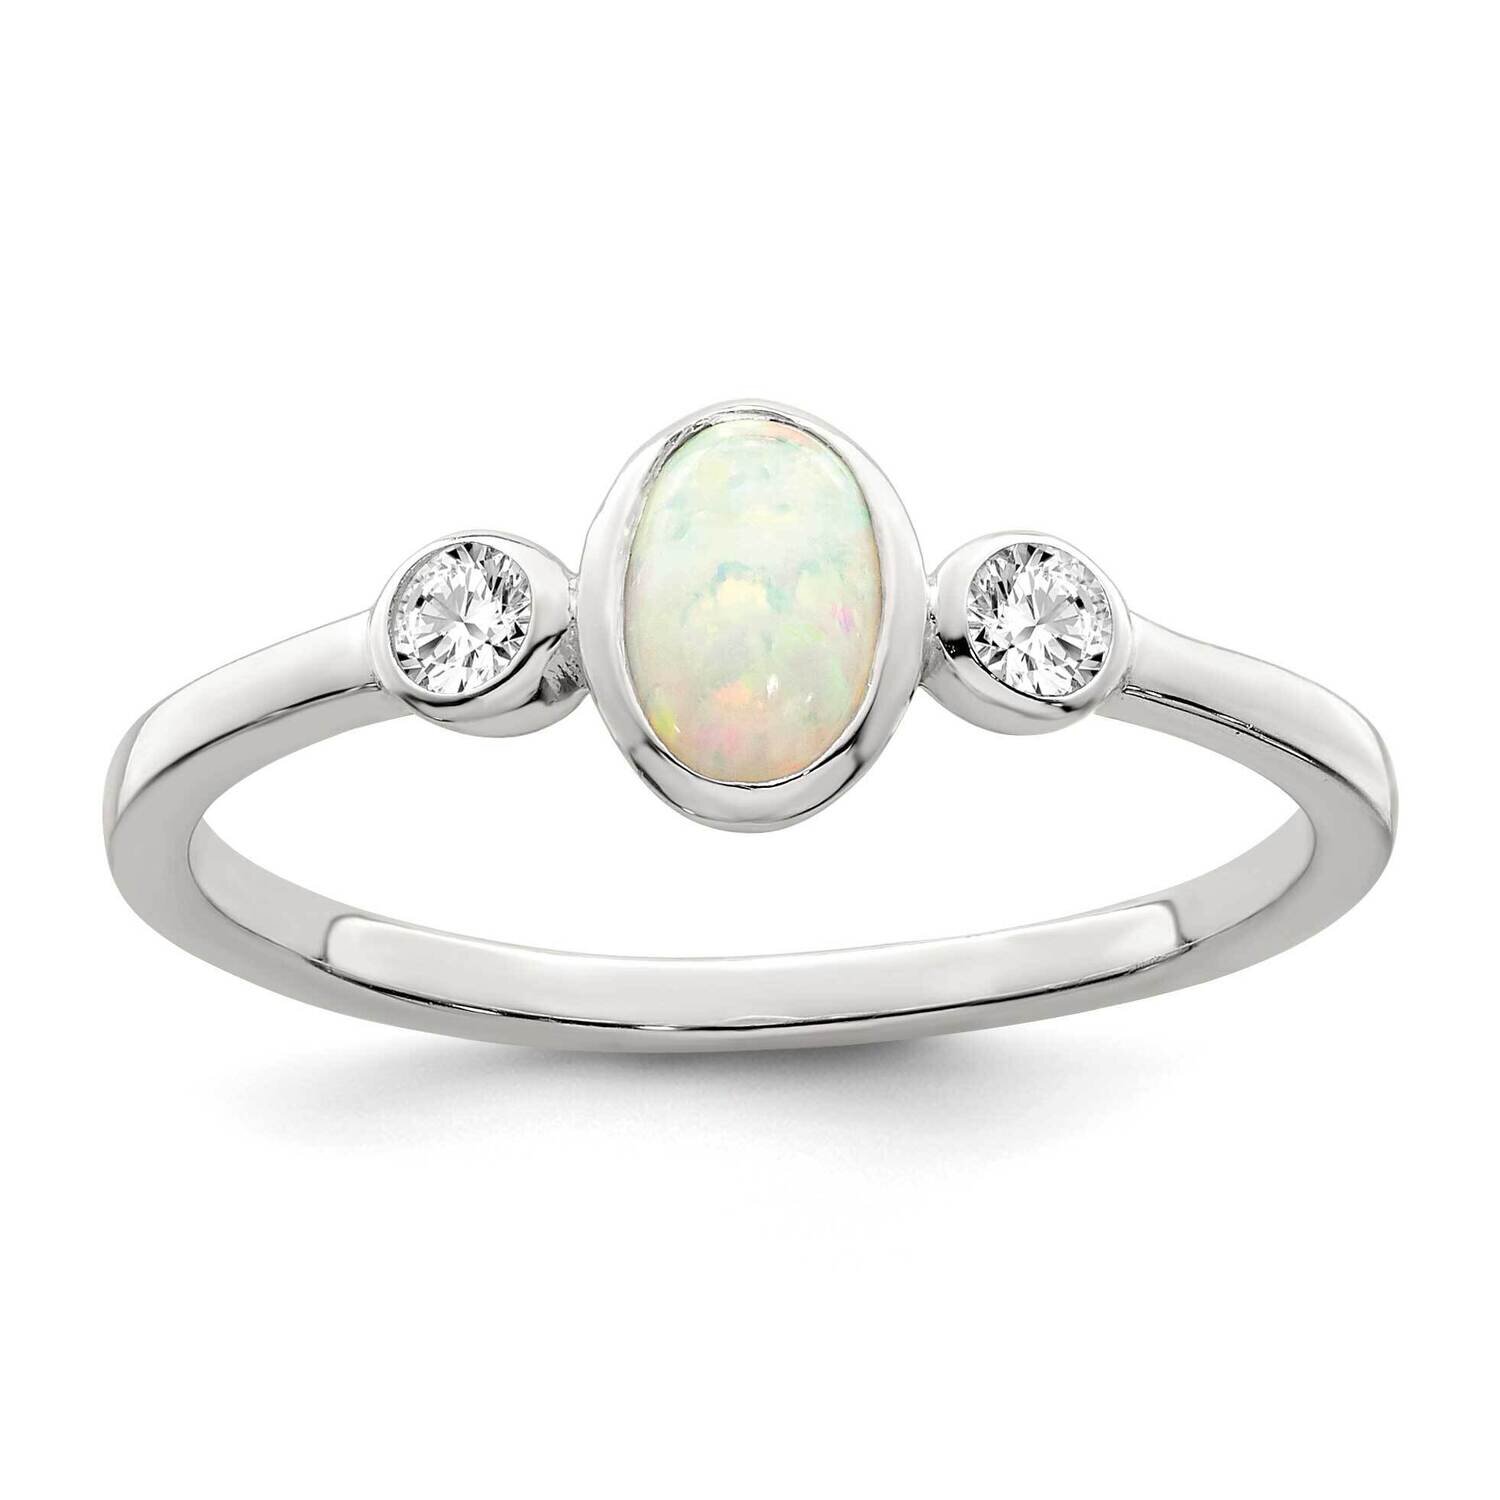 CZ Diamond and White Created Opal Ring Sterling Silver Polished QR7327